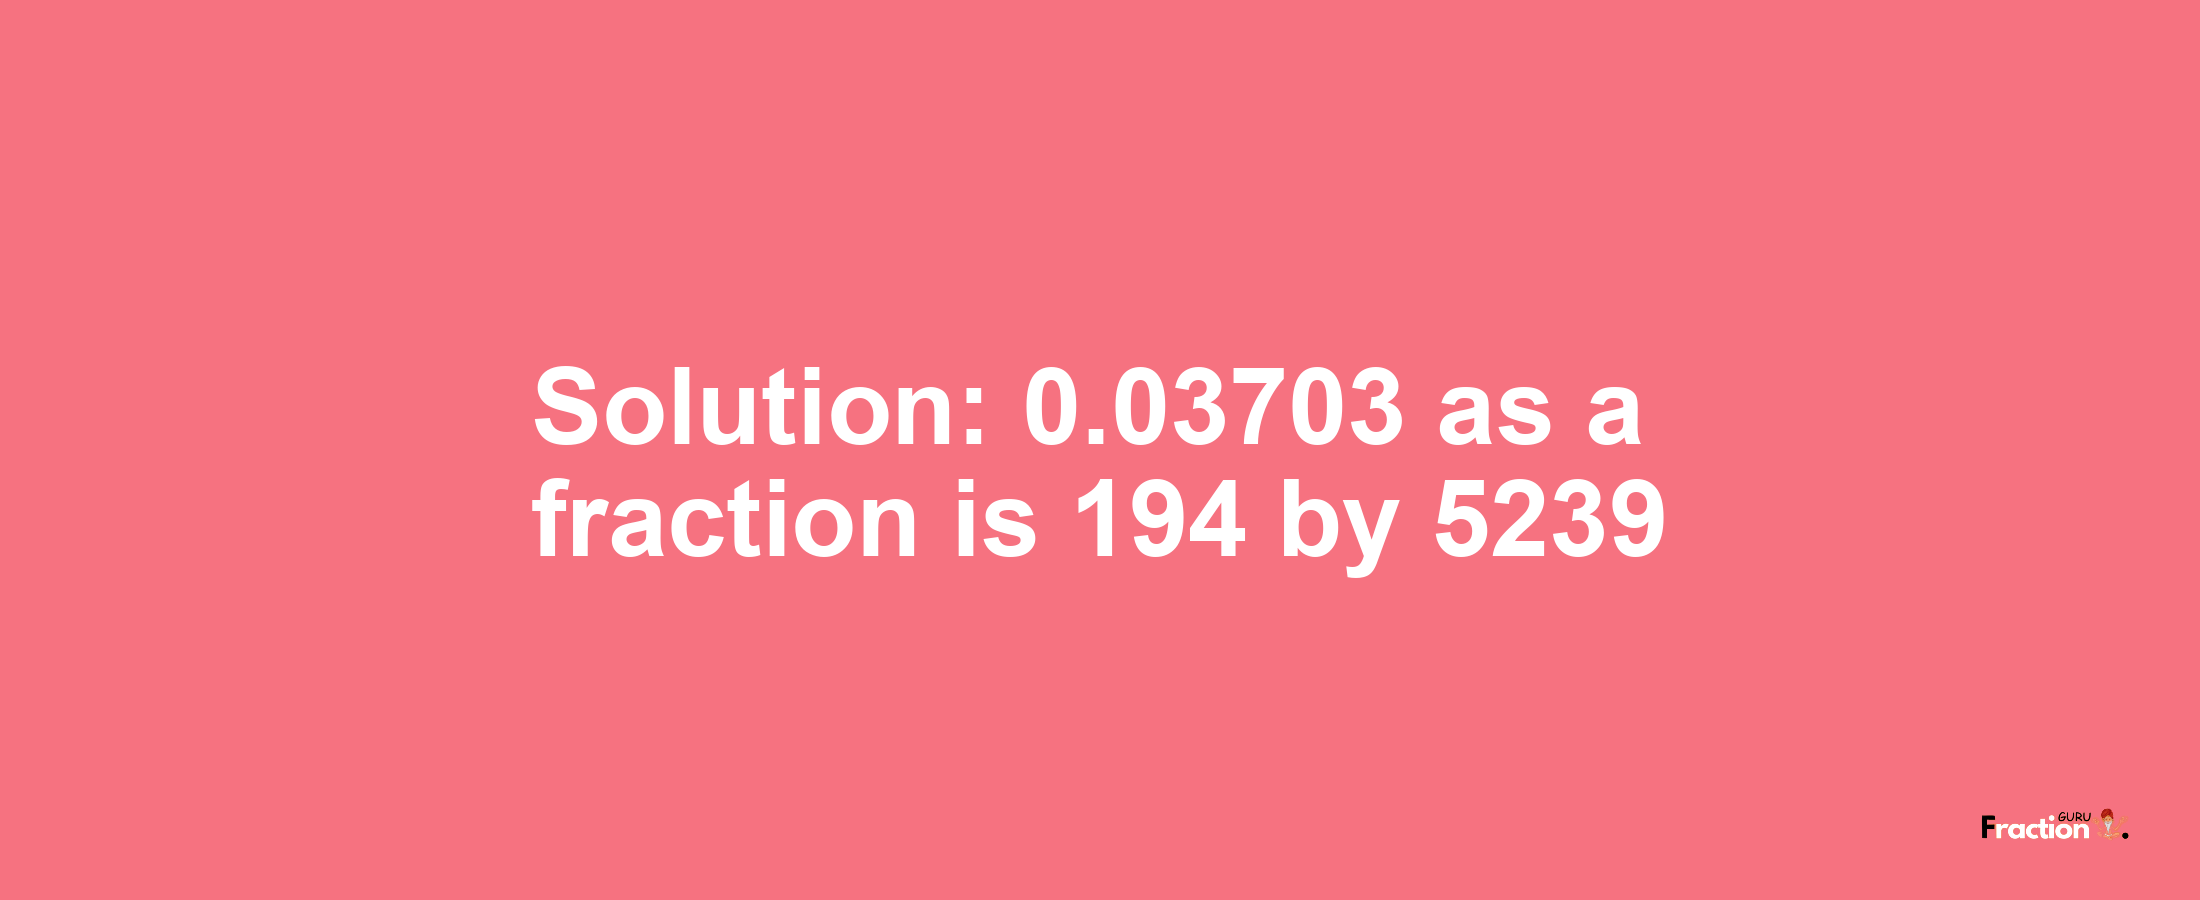 Solution:0.03703 as a fraction is 194/5239